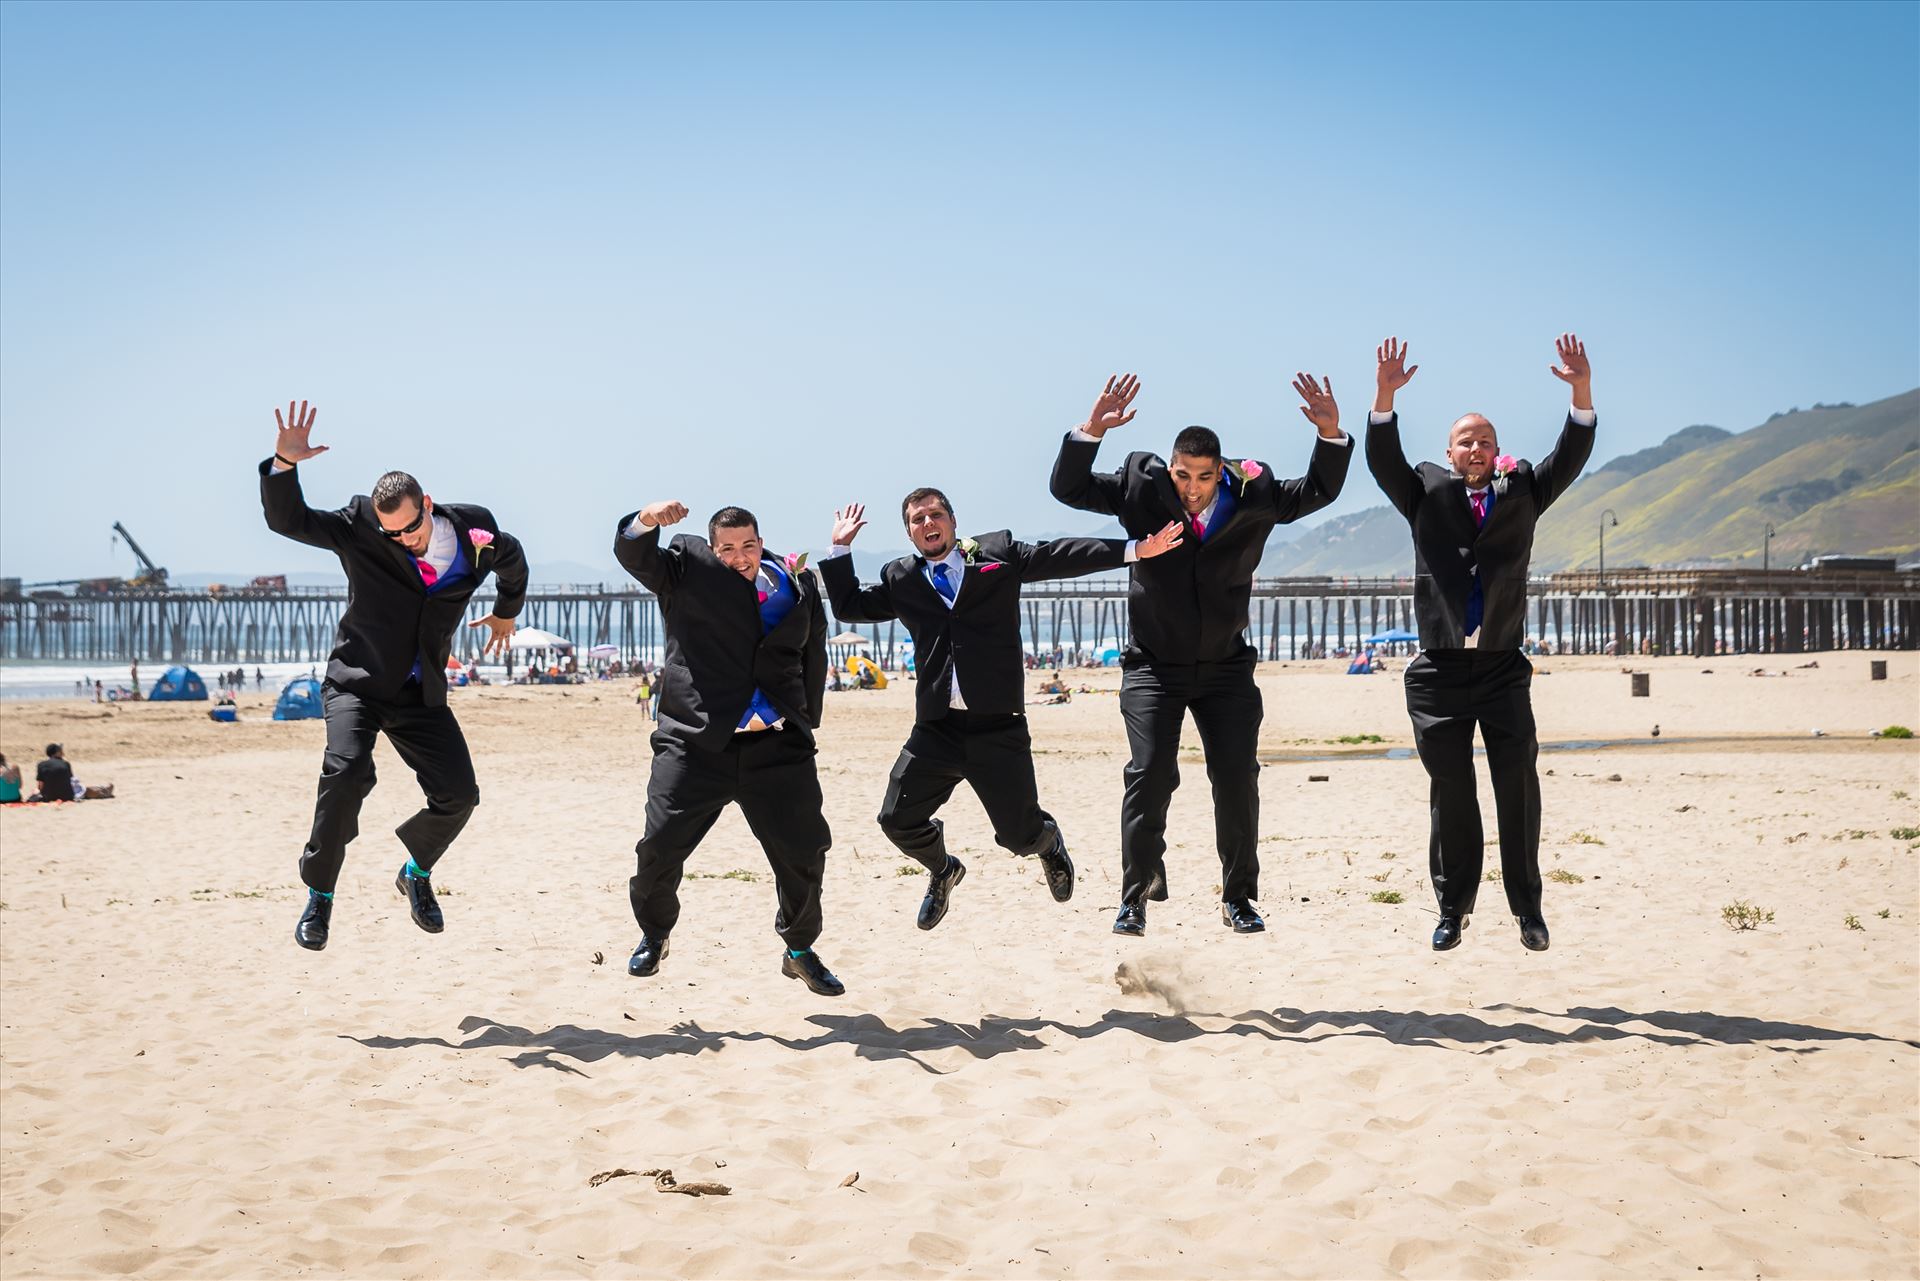 Jessica and Michael 20 - Sea Venture Resort and Spa Wedding Photography by Mirror's Edge Photography in Pismo Beach, California. Groom and Groomsmen jumping by Sarah Williams